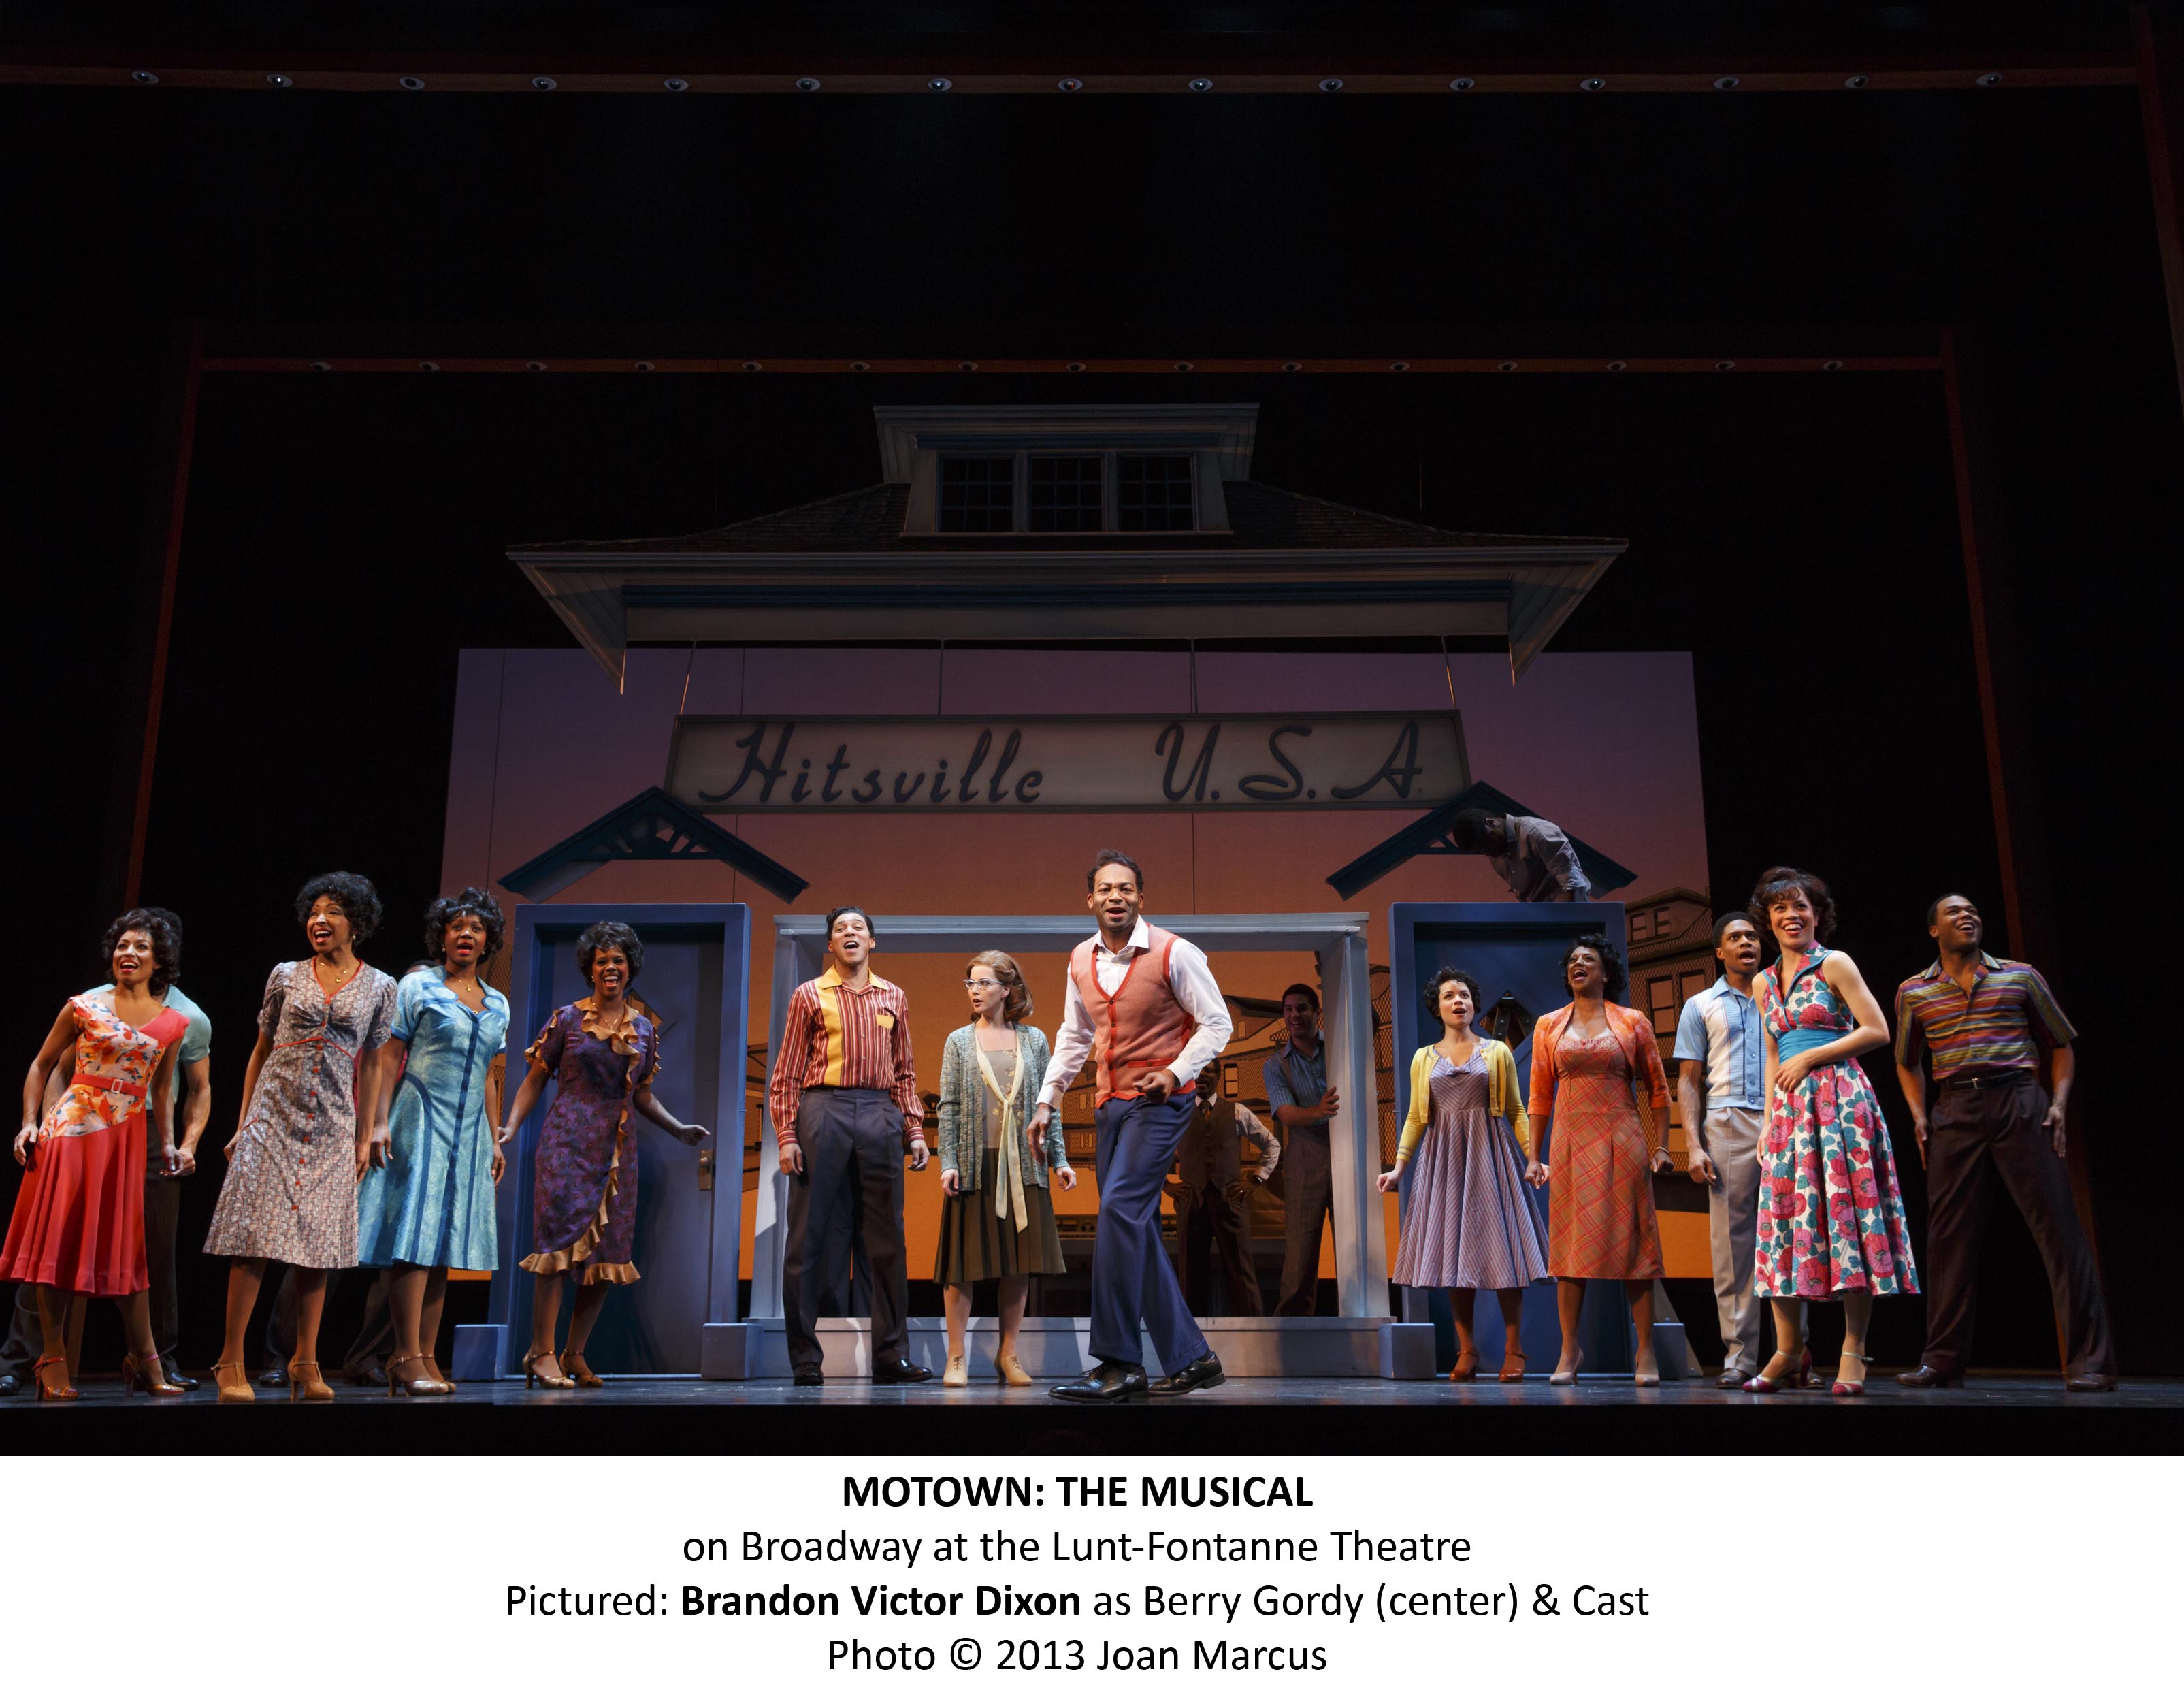 MOTOWN THE MUSICAL AT THE PANTAGES THEATER IN HOLLYWOOD THROUGH JUNE 7, 2015